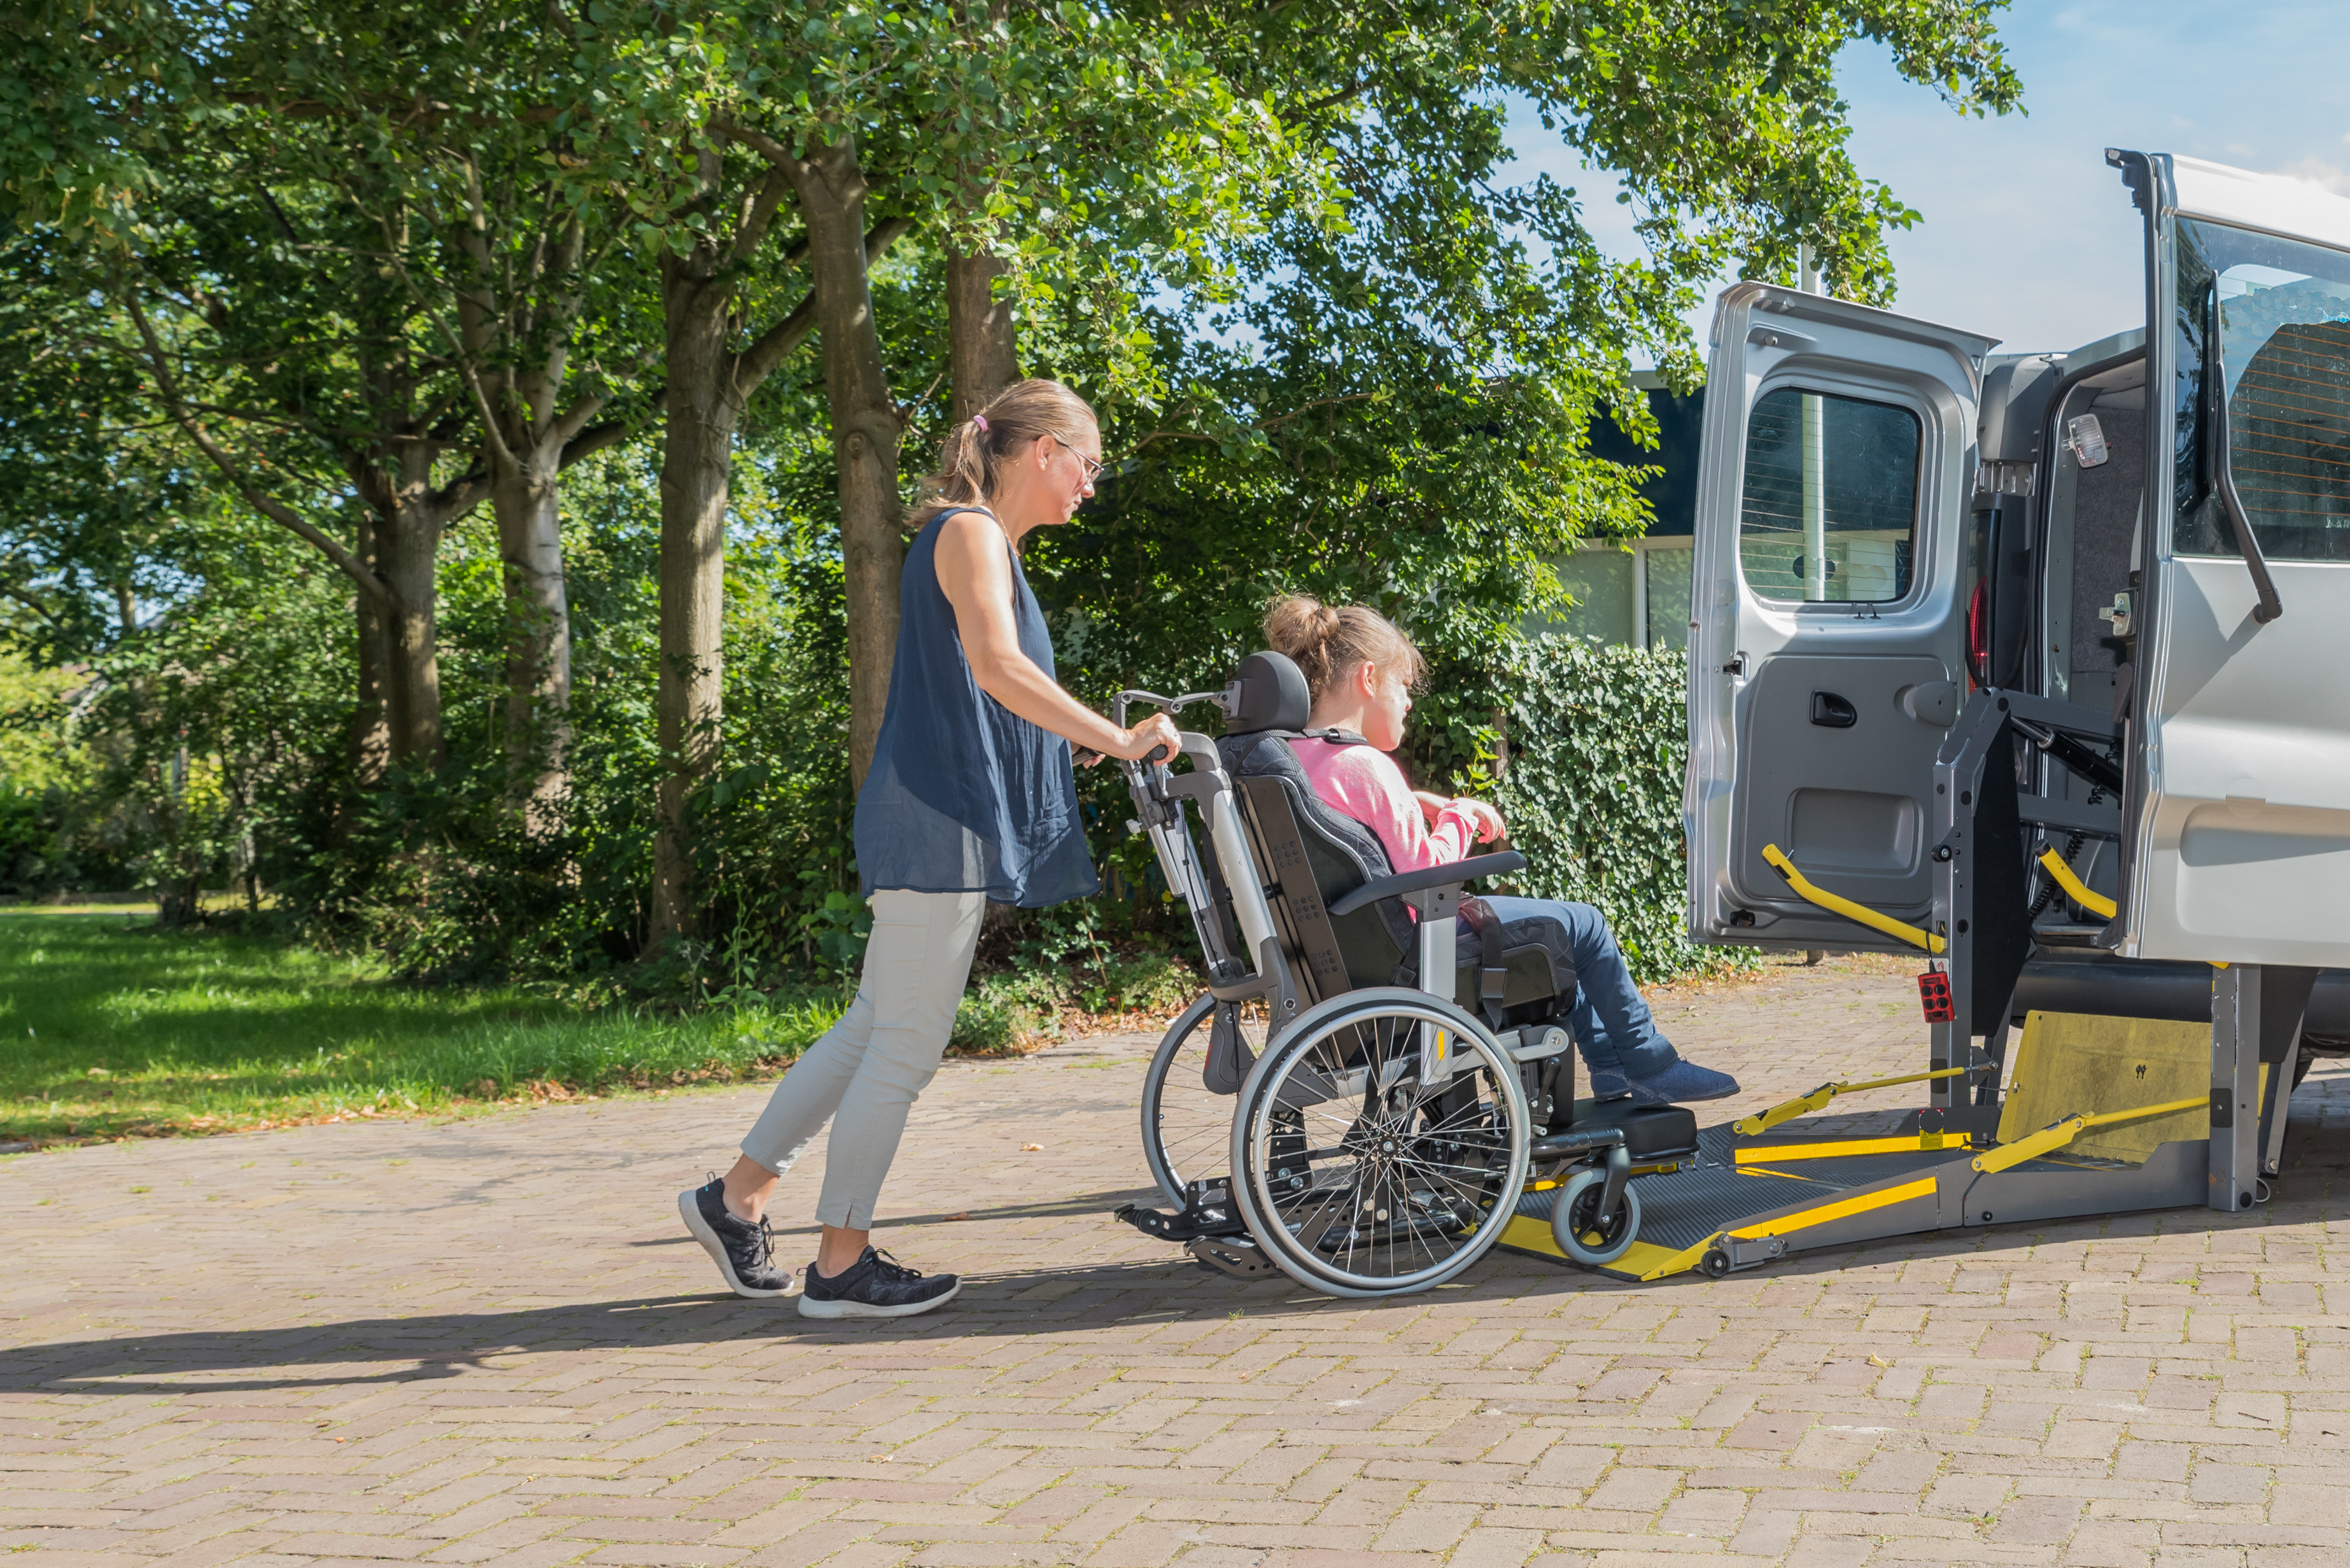 A woman pushes a younger girl in a wheelchair onto a loading platform that leads into the back of a van.